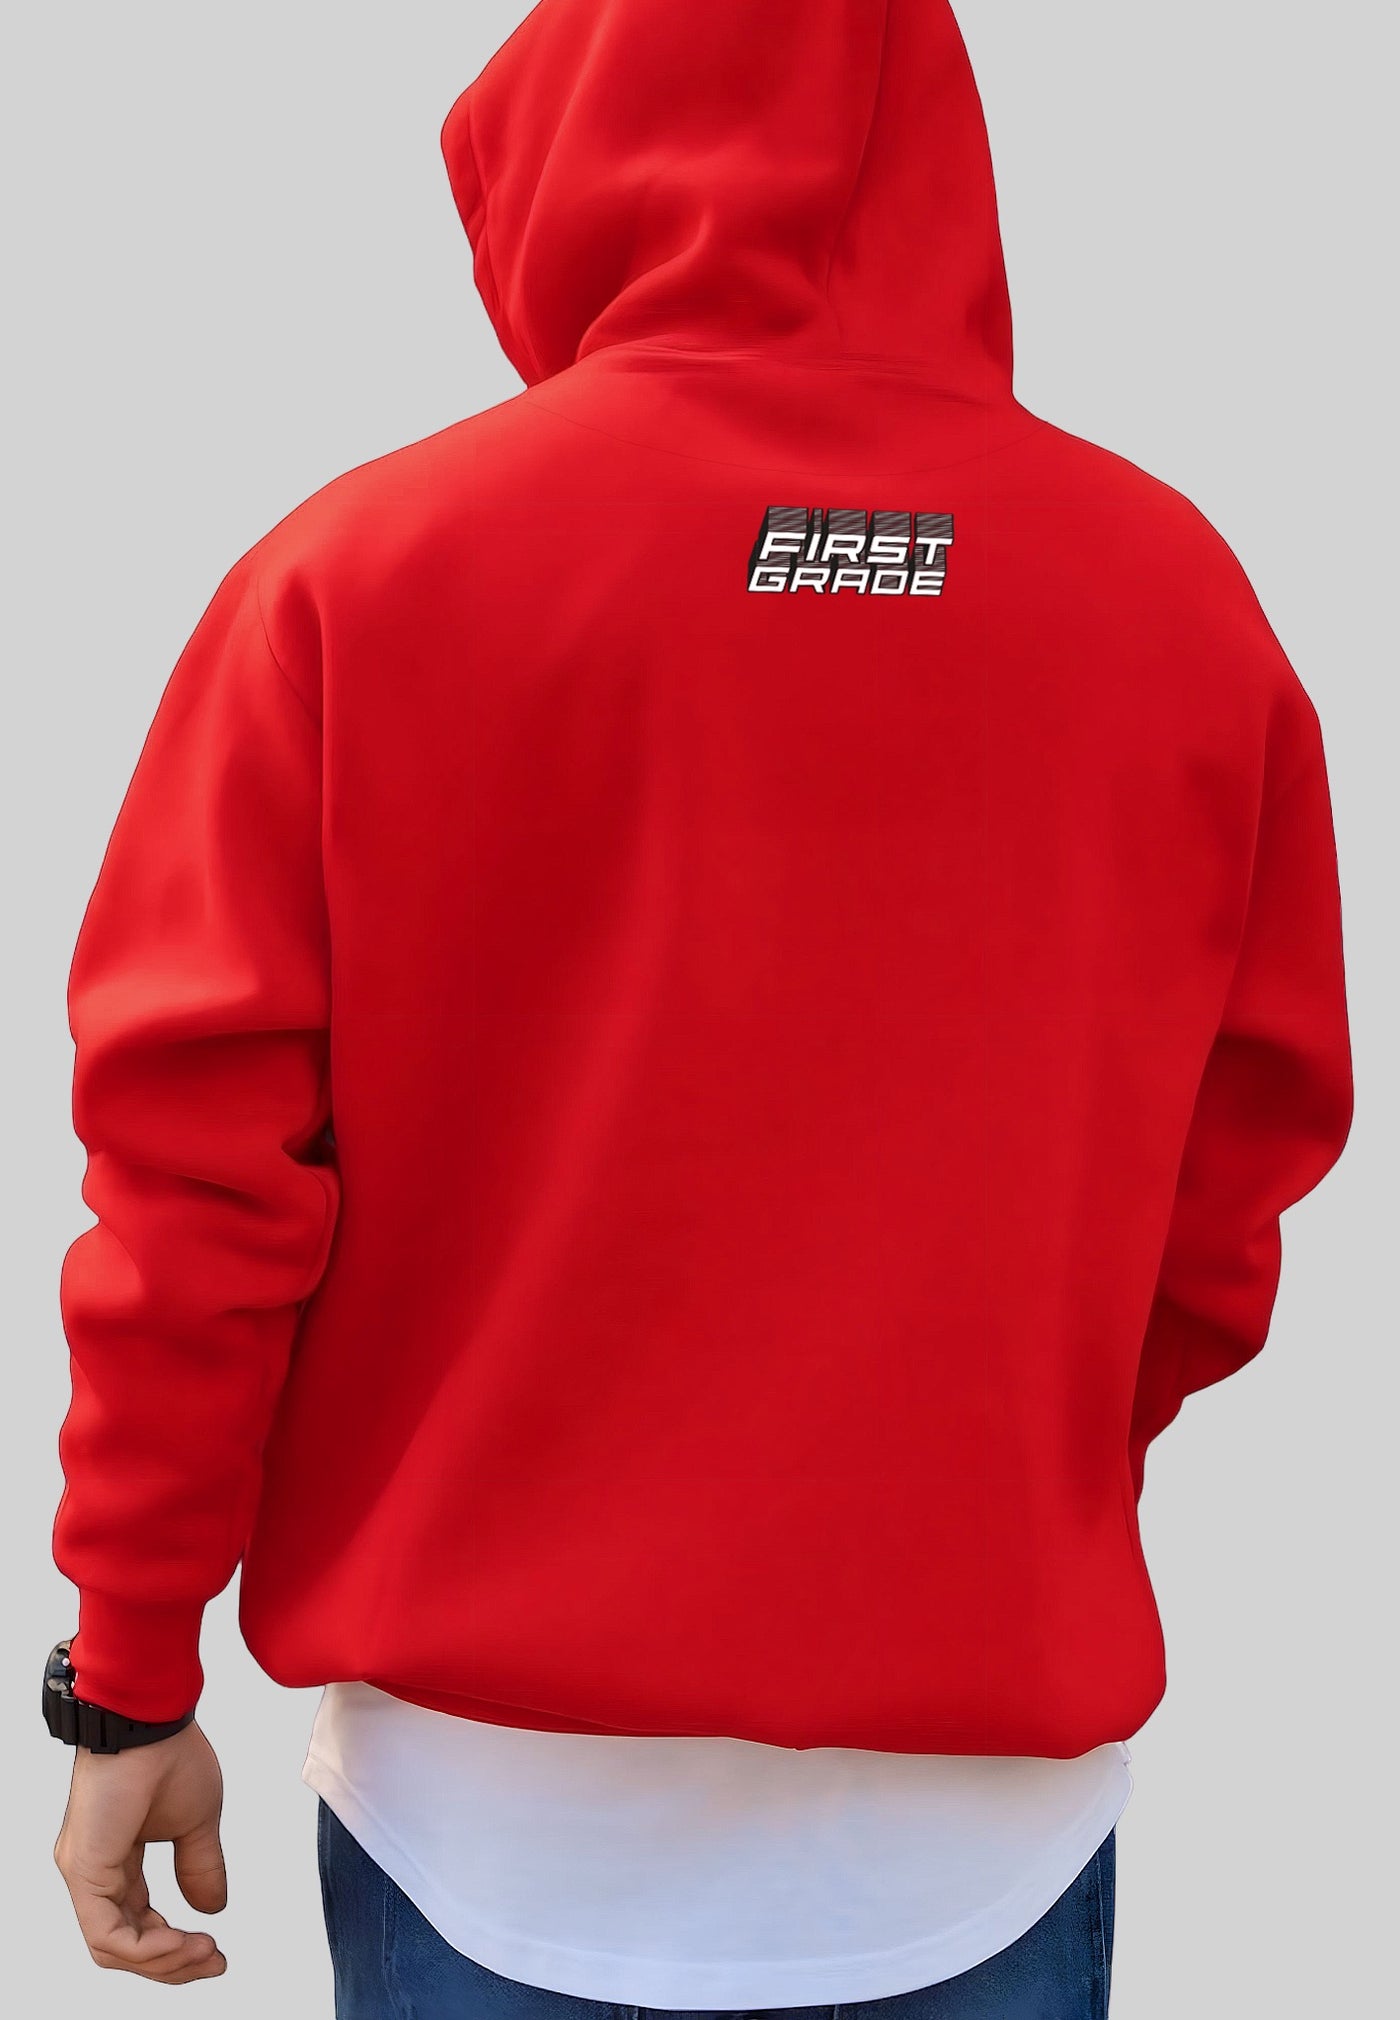 FirstGrade Anime Hoodie red